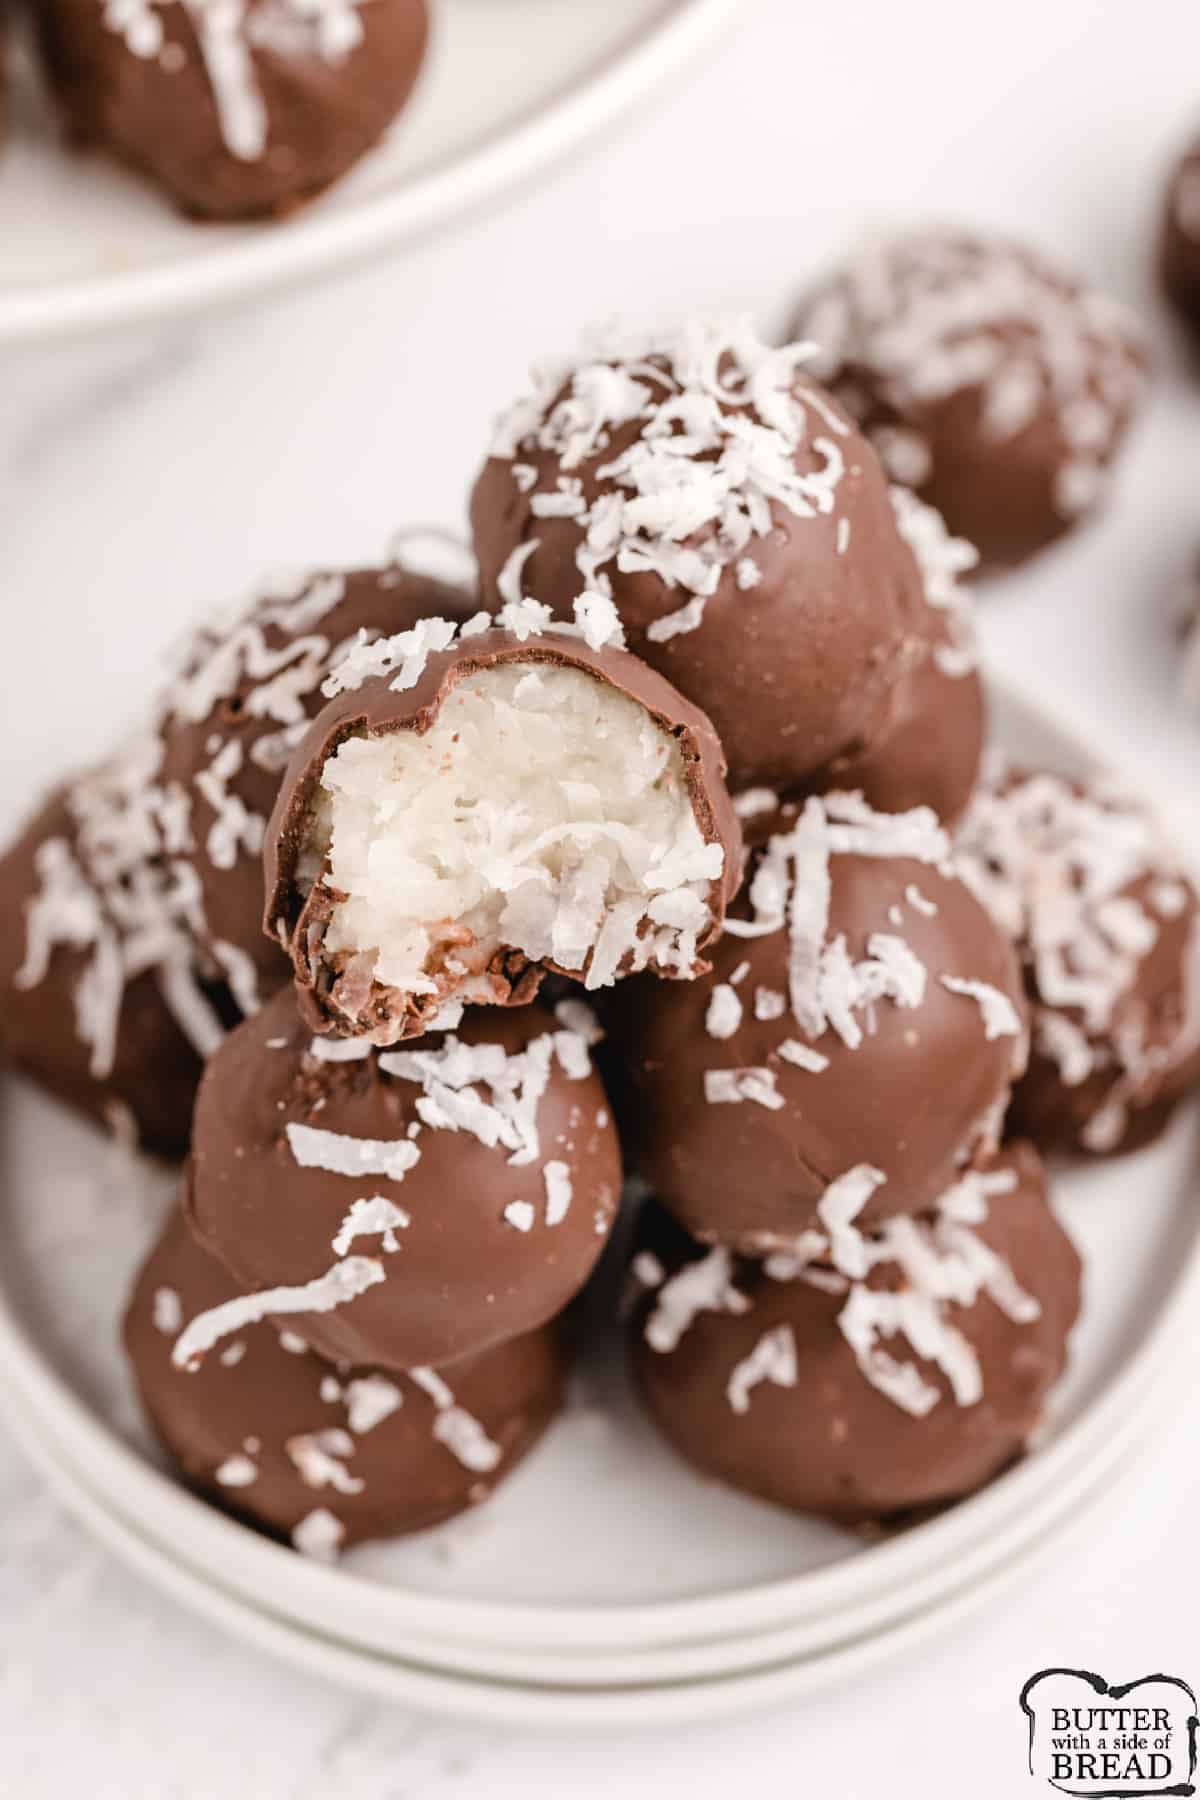 Old Fashioned Potato Candy recipe made with mashed potatoes tastes like a Mounds bar! Only 5 ingredients to make this delicious chocolate covered potato candy. 